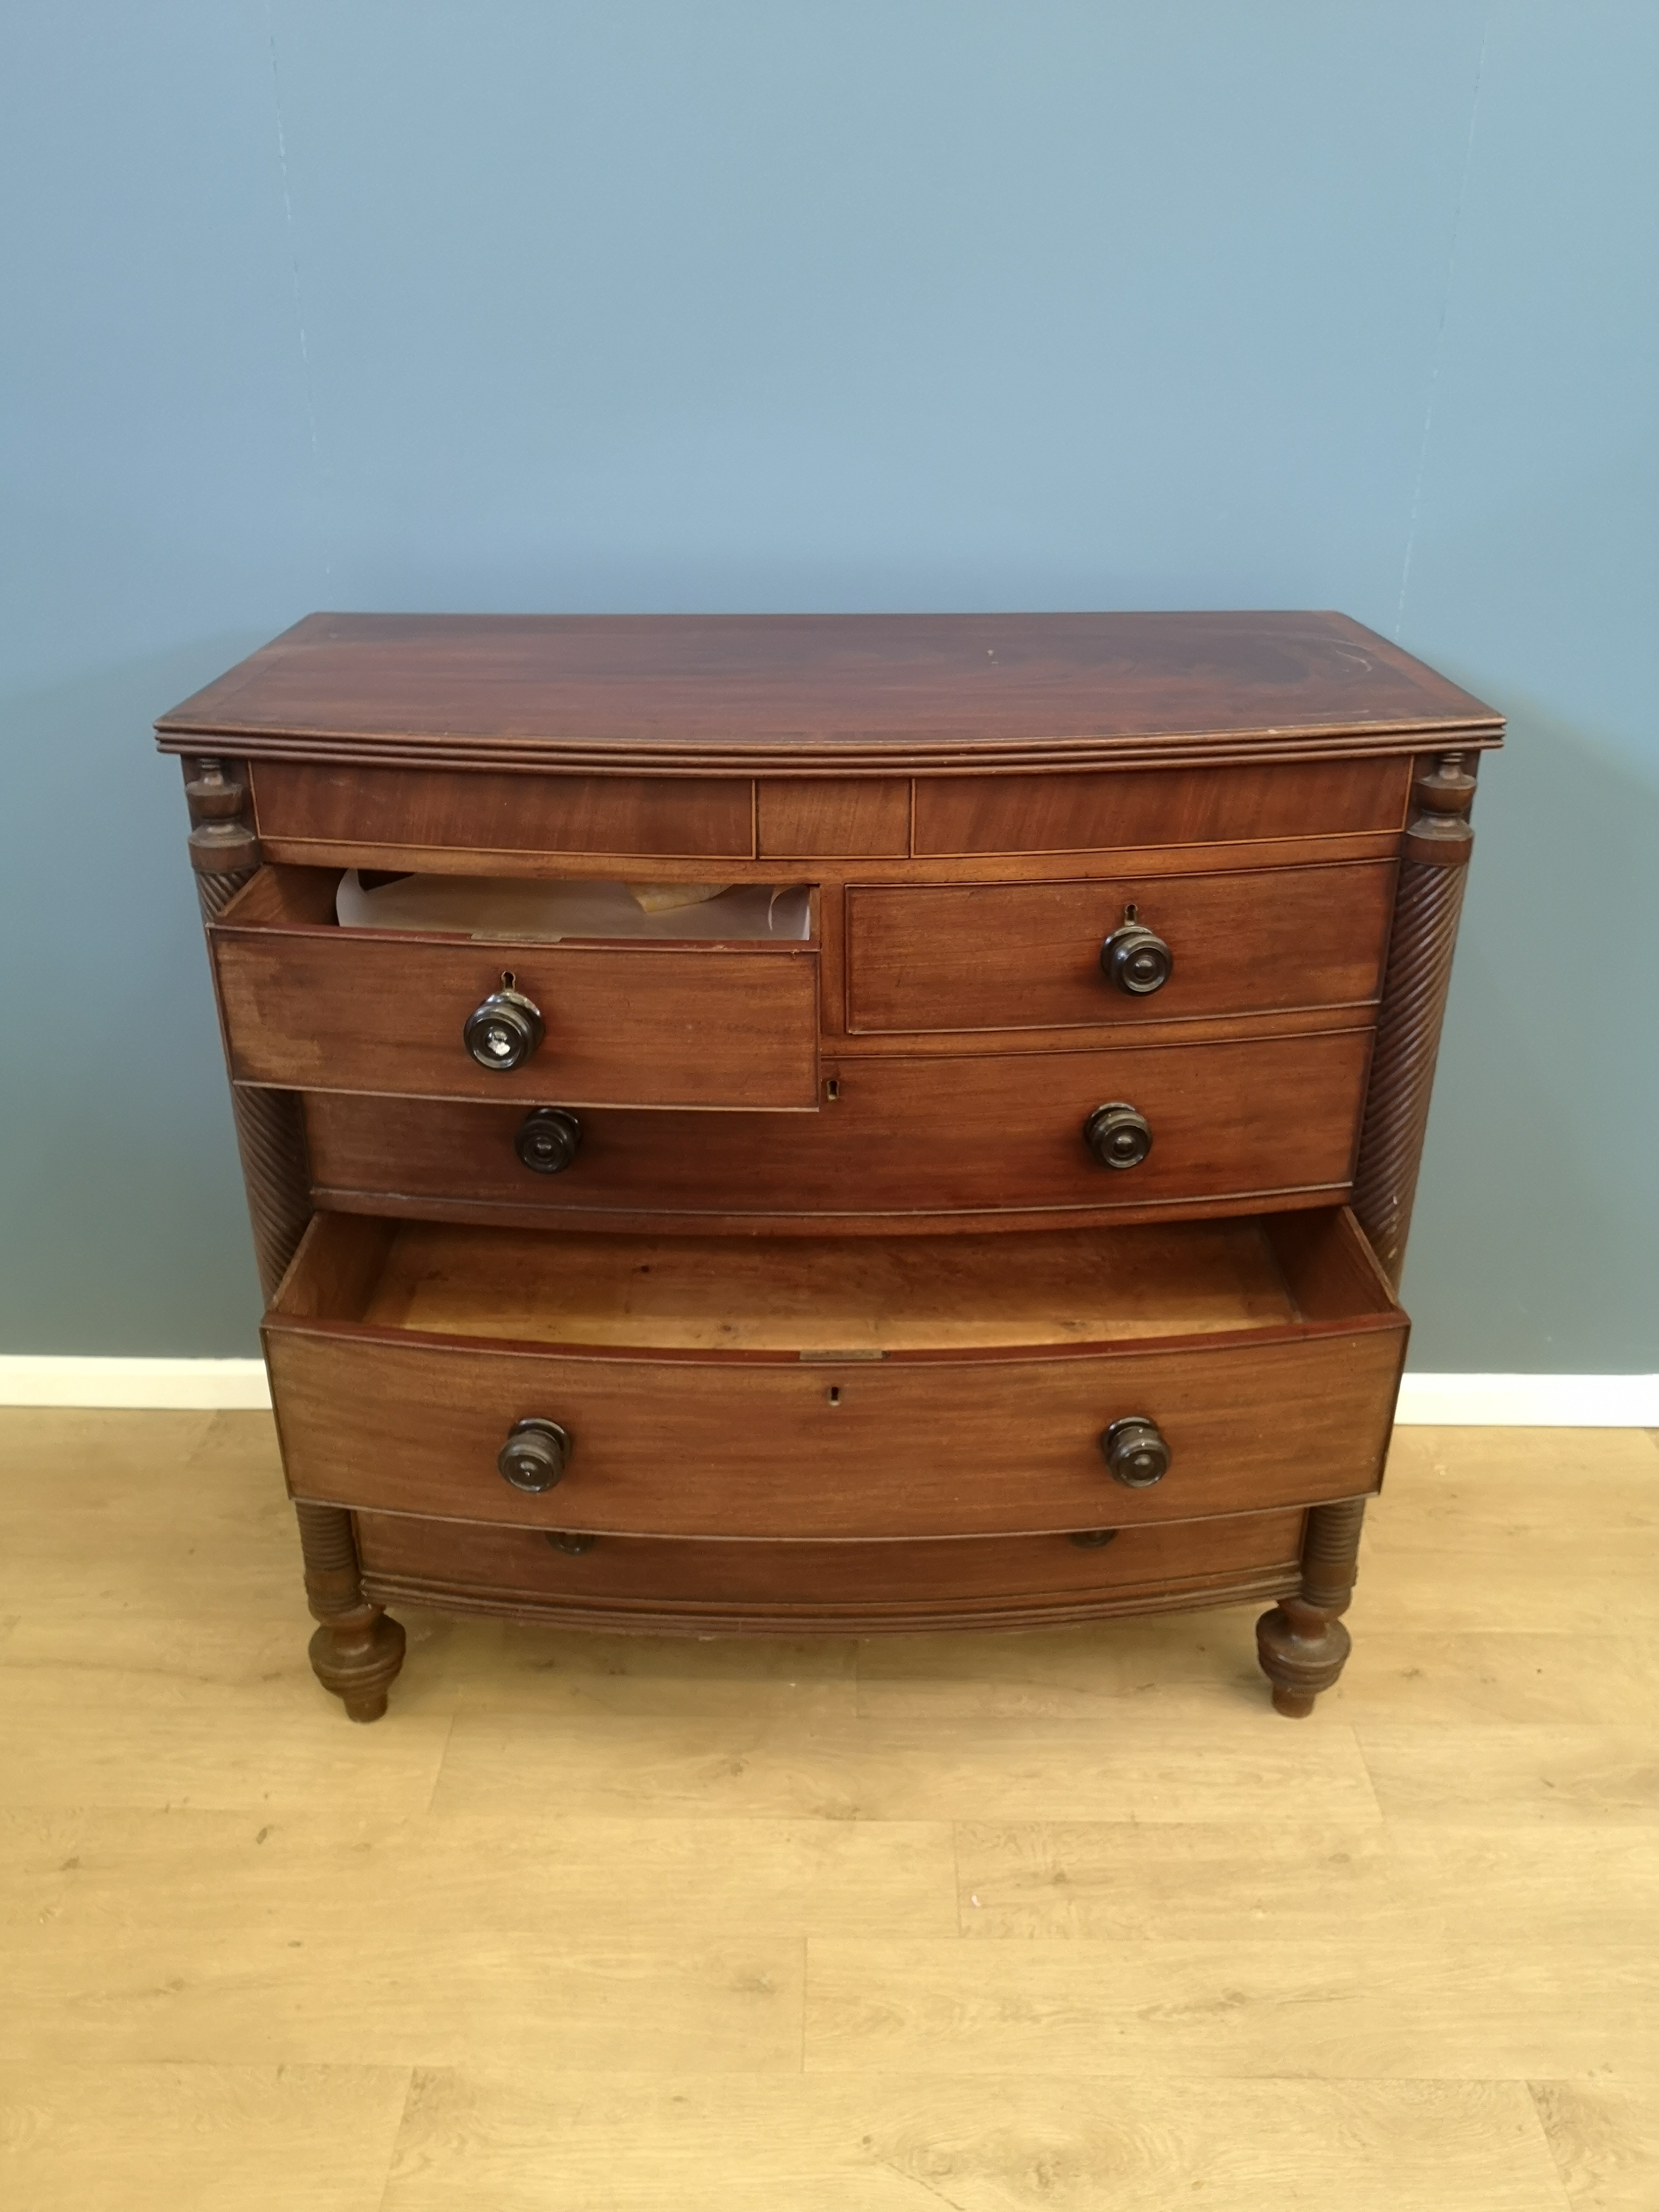 19th century mahogany bow fronted chest of drawers - Image 6 of 6